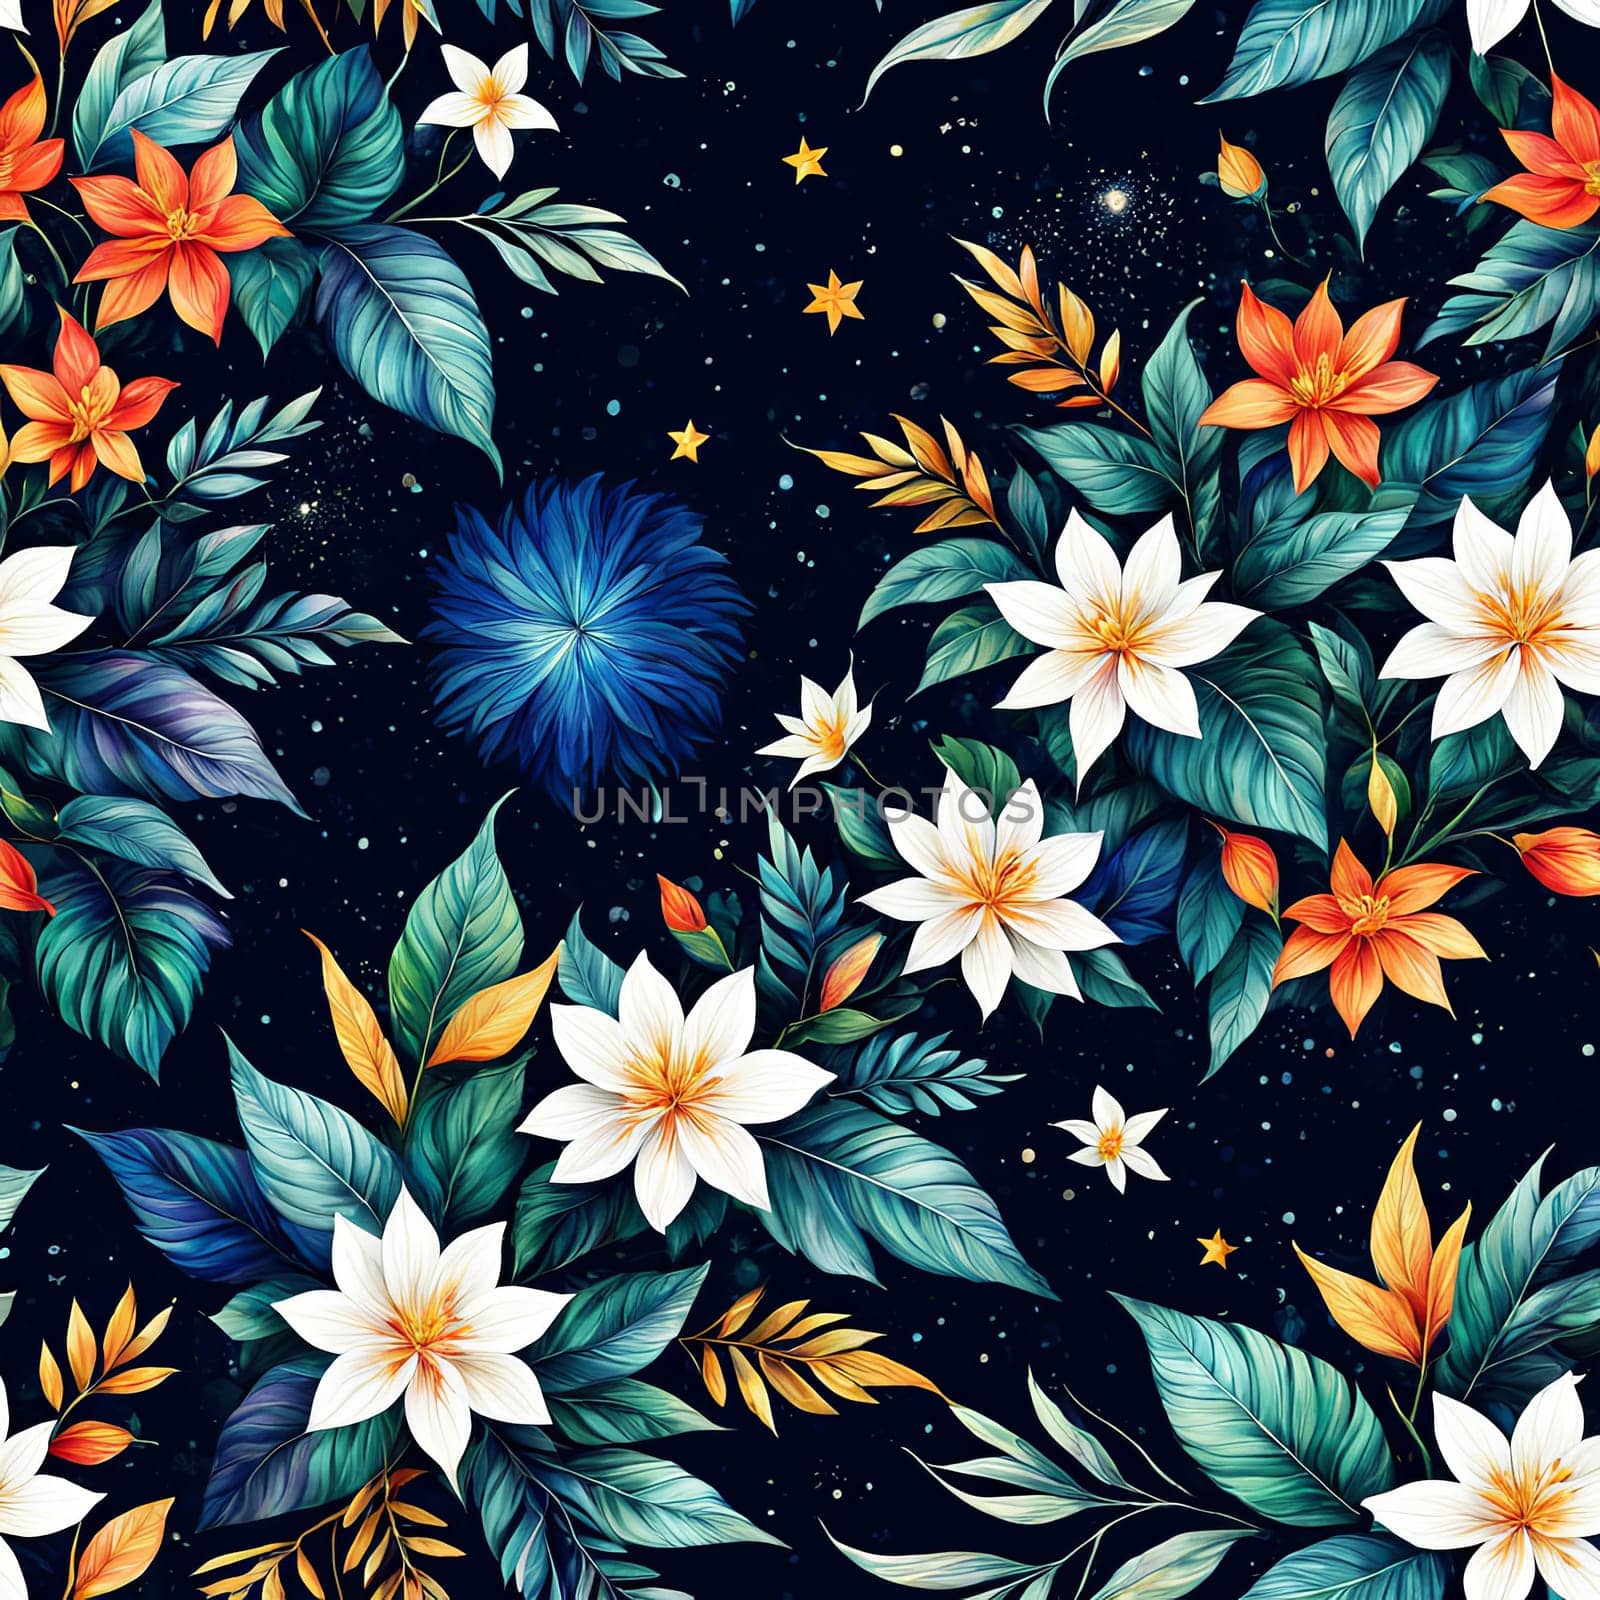 Striking, colorful flower painting with intricate details, vivid hues, beautifully contrasted against dark, black background. For interior design, textiles, clothing, gift wrapping, web design, print